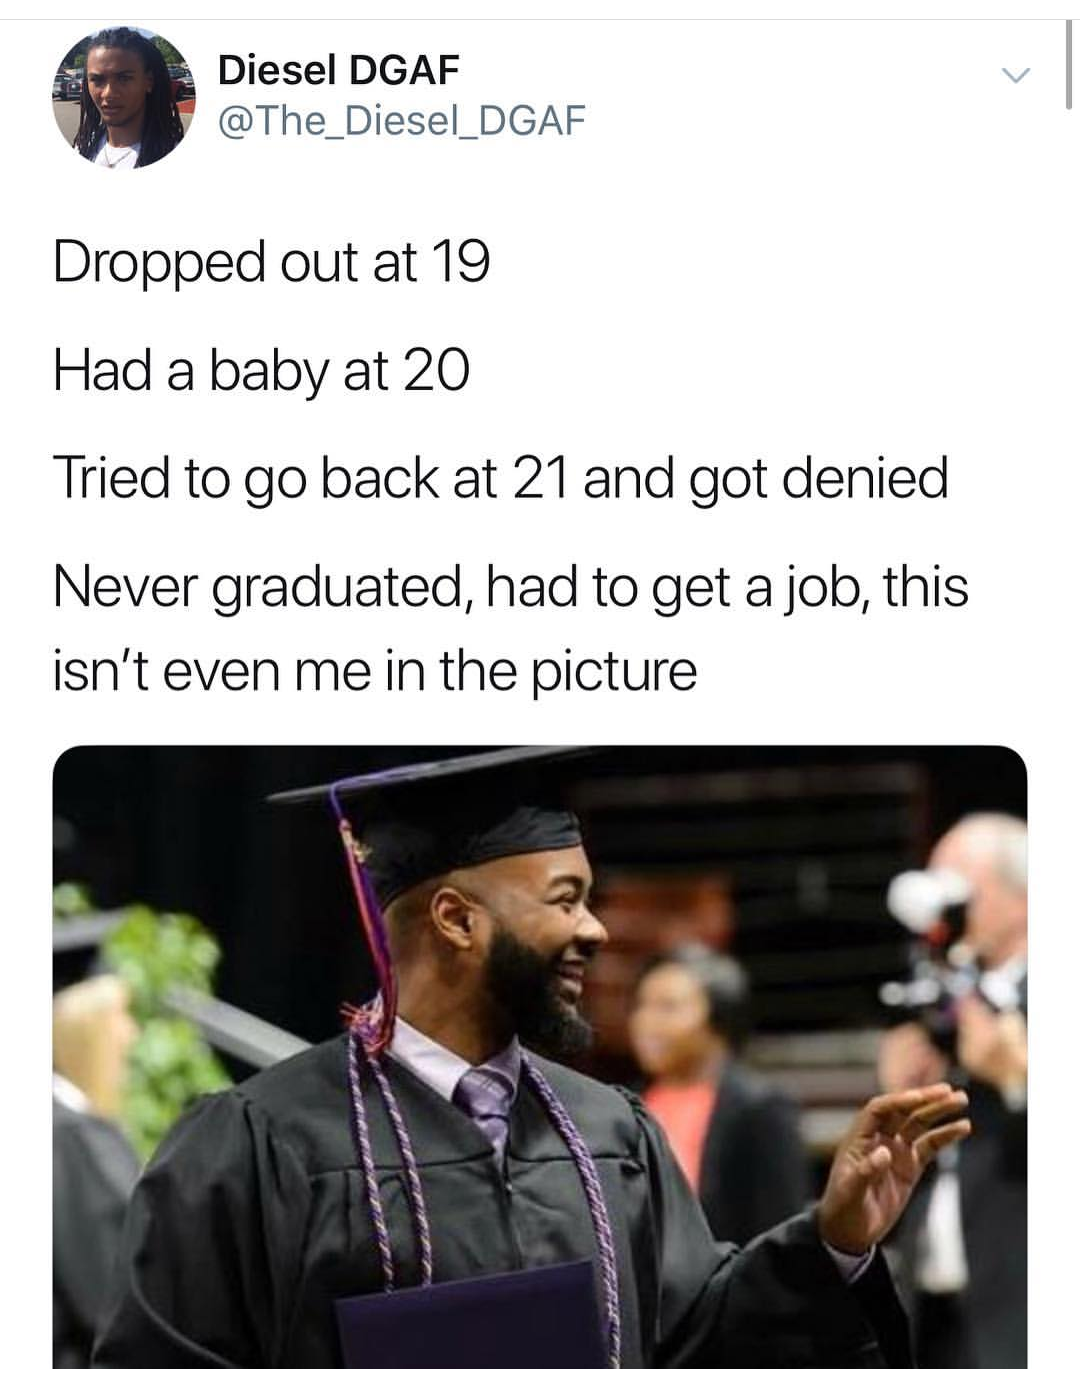 God's Plan - Diesel Dgaf Dropped out at 19 Had a baby at 20 Tried to go back at 21 and got denied Never graduated, had to get a job, this isn't even me in the picture